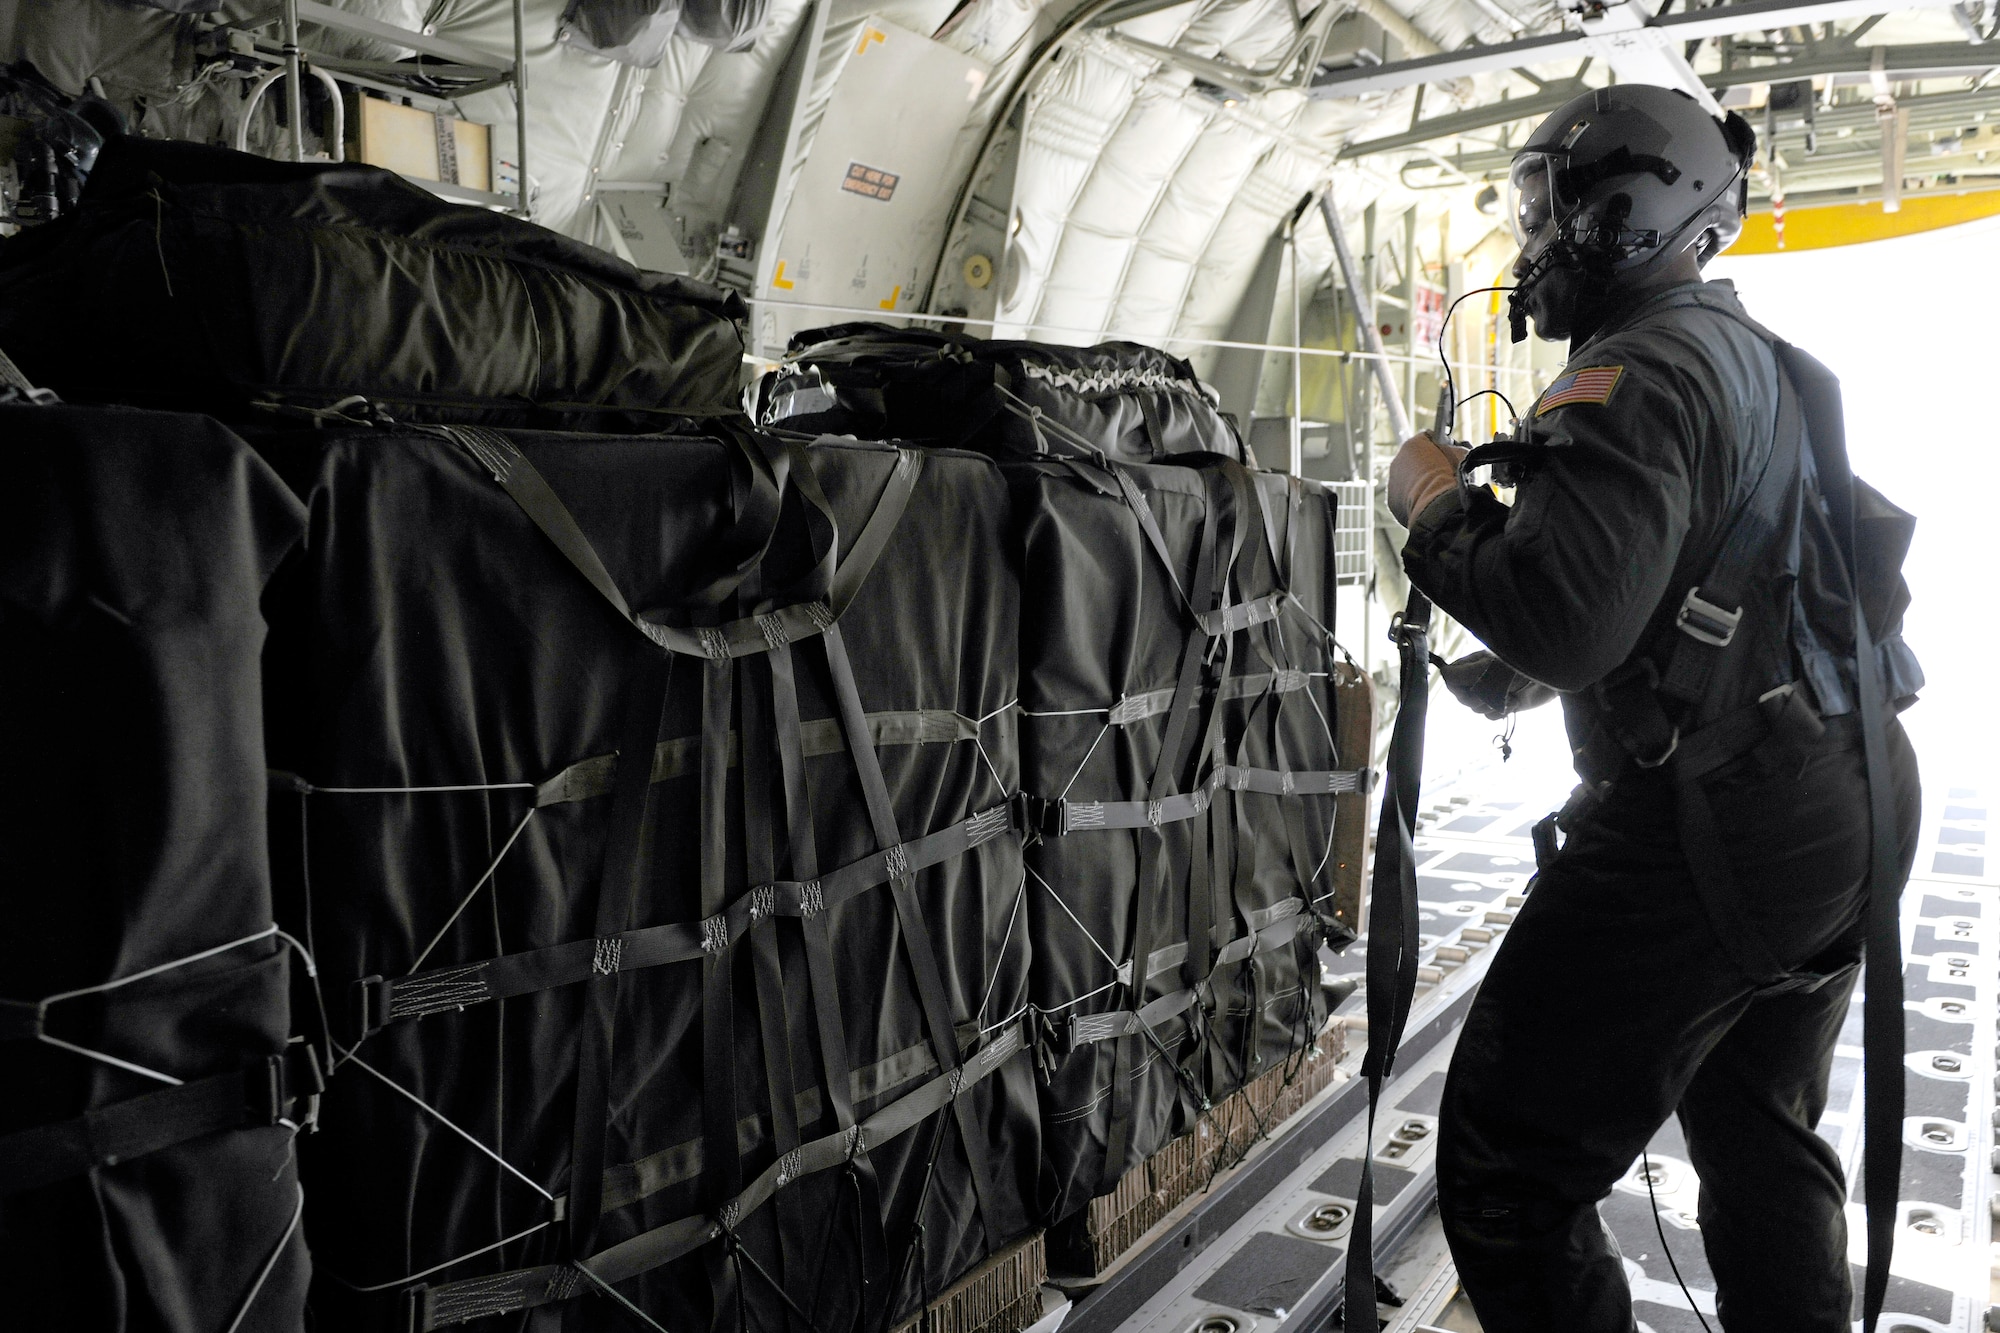 Chief Master Sgt. Lewis Holston, 37th Airlift Squadron superintendent, oversees the ten-bundle container deployment system drop out of the cargo bay of a C130J, March 16, 2012 at Ramstein Air Base, Germany.  The cargo was dropped in order to support field-training exercises for the 173rd Airborne Brigade Combat Team from Vicenza, Italy. This training gave pilots and loadmasters here an opportunity to practice this type of airdrop.  (U.S. Air Force photo/Staff Sgt. Chris Willis)